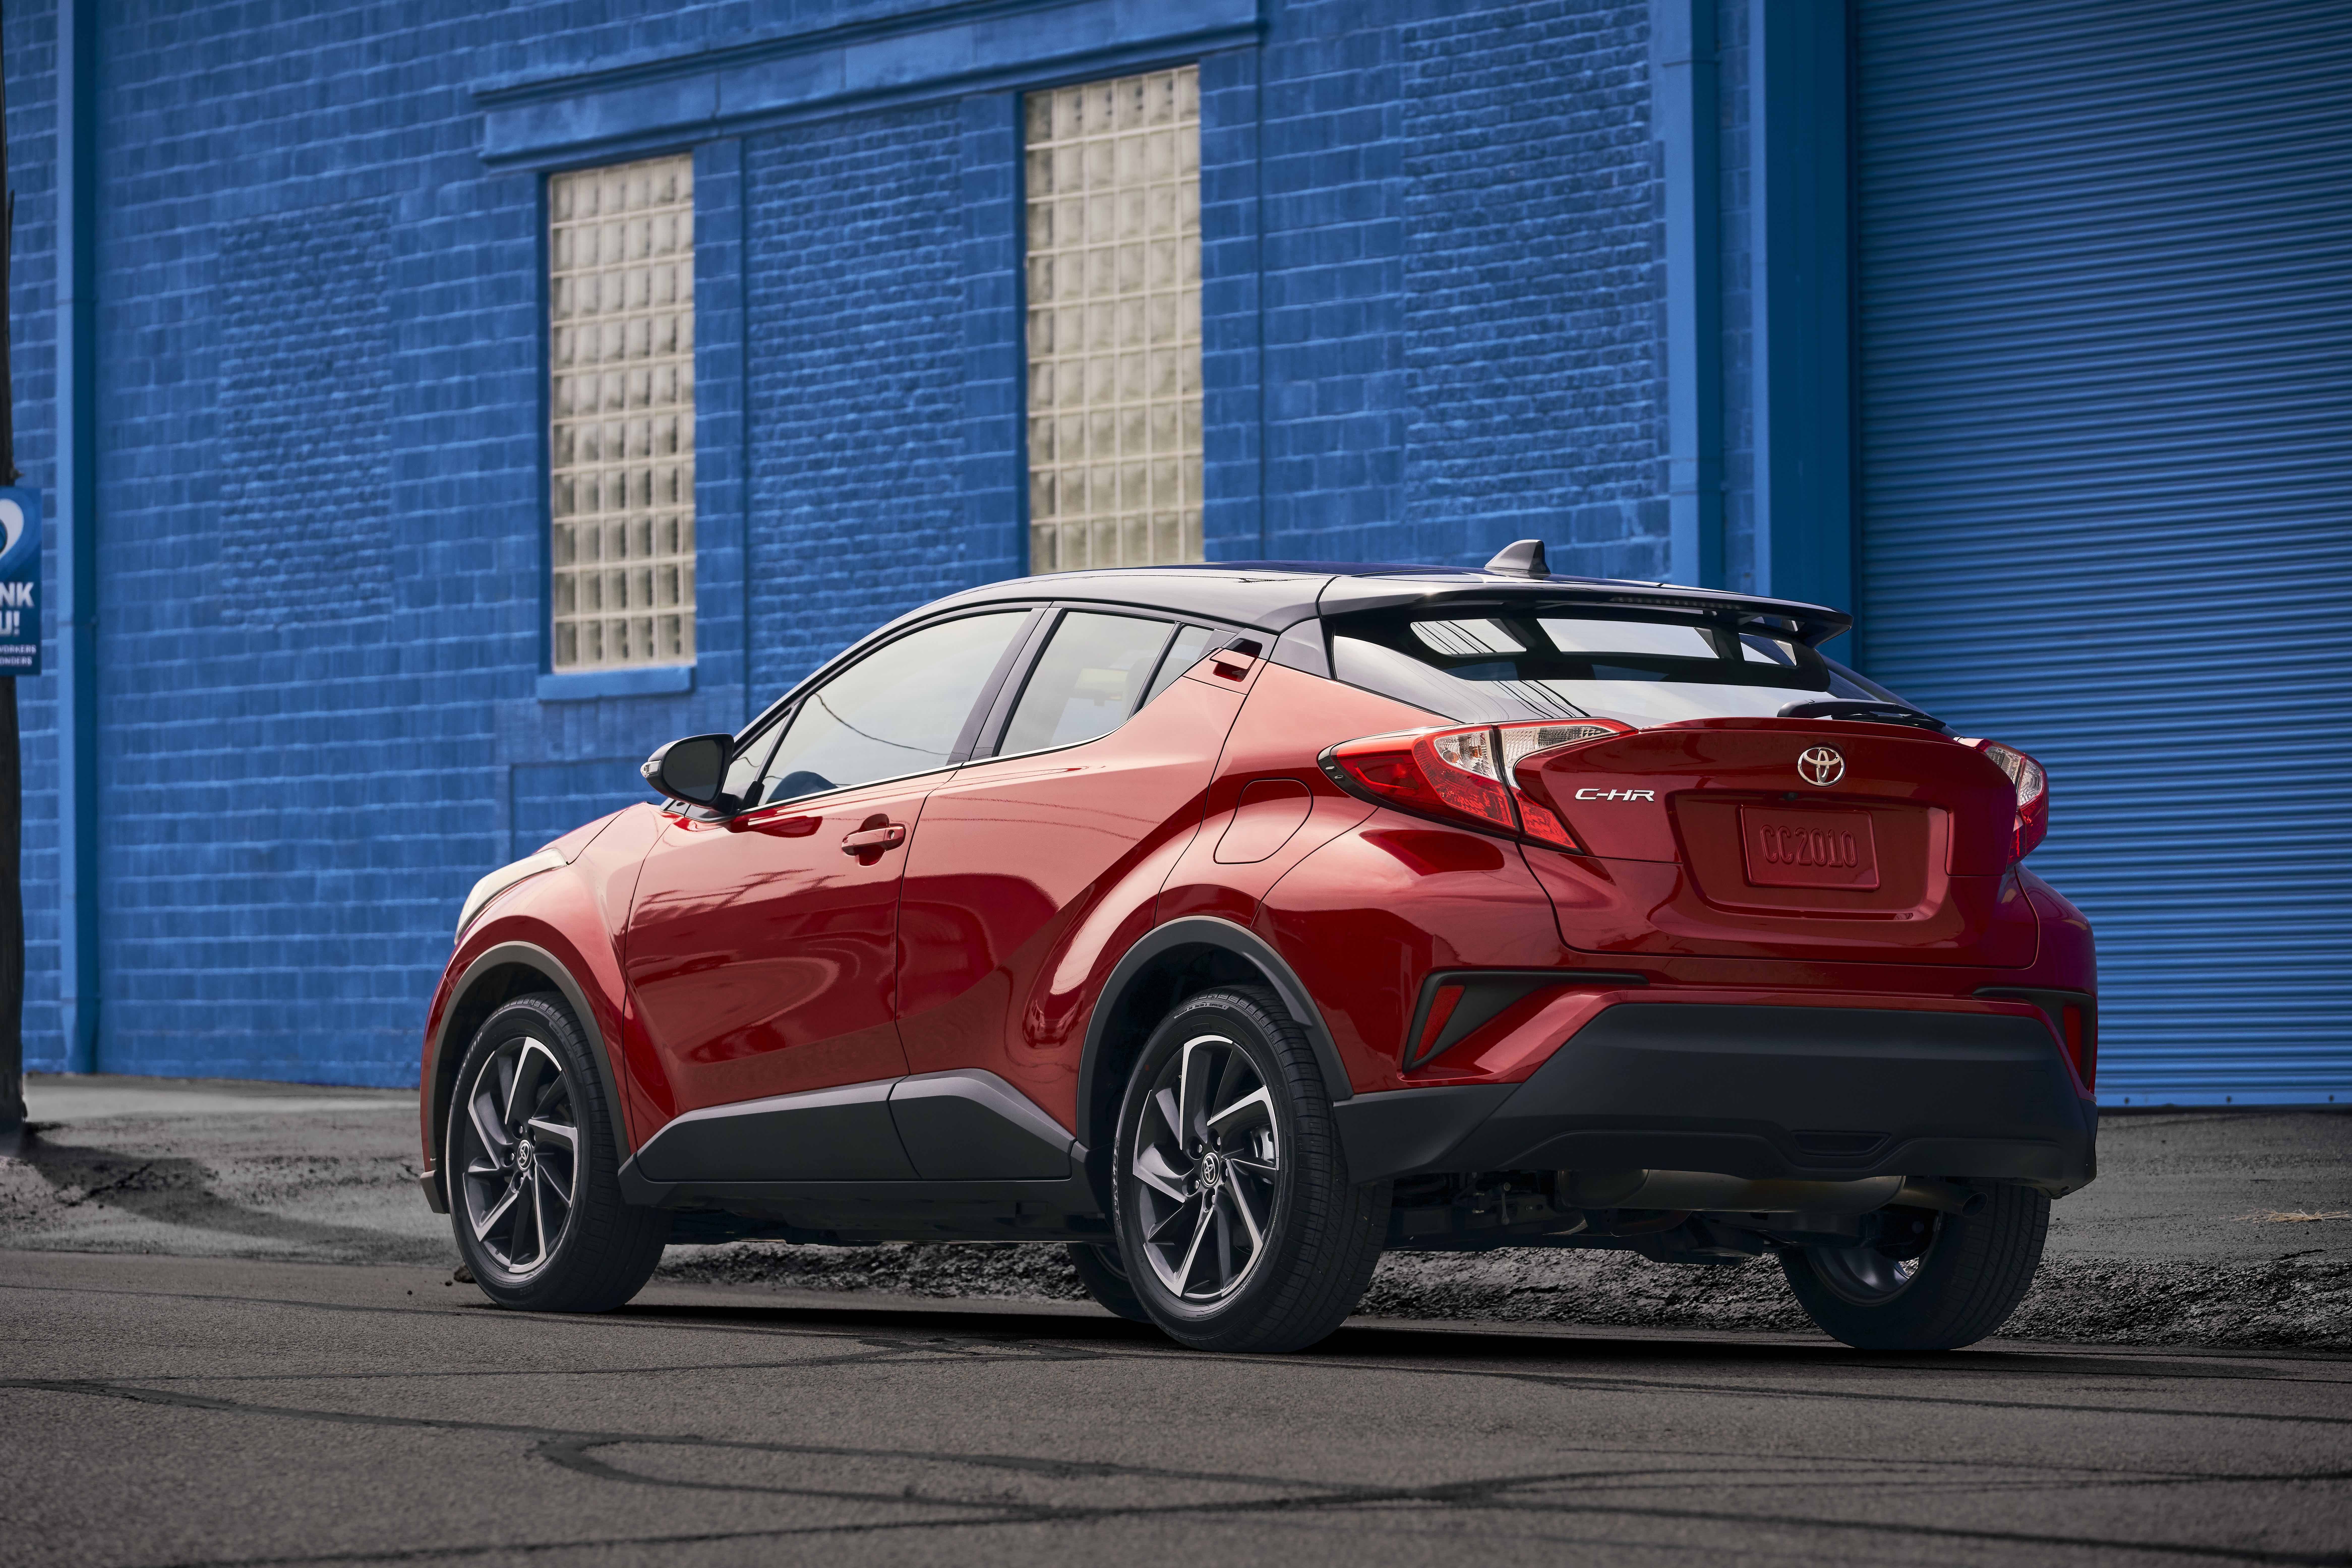 2018 Toyota C-HR Specs & Features Review